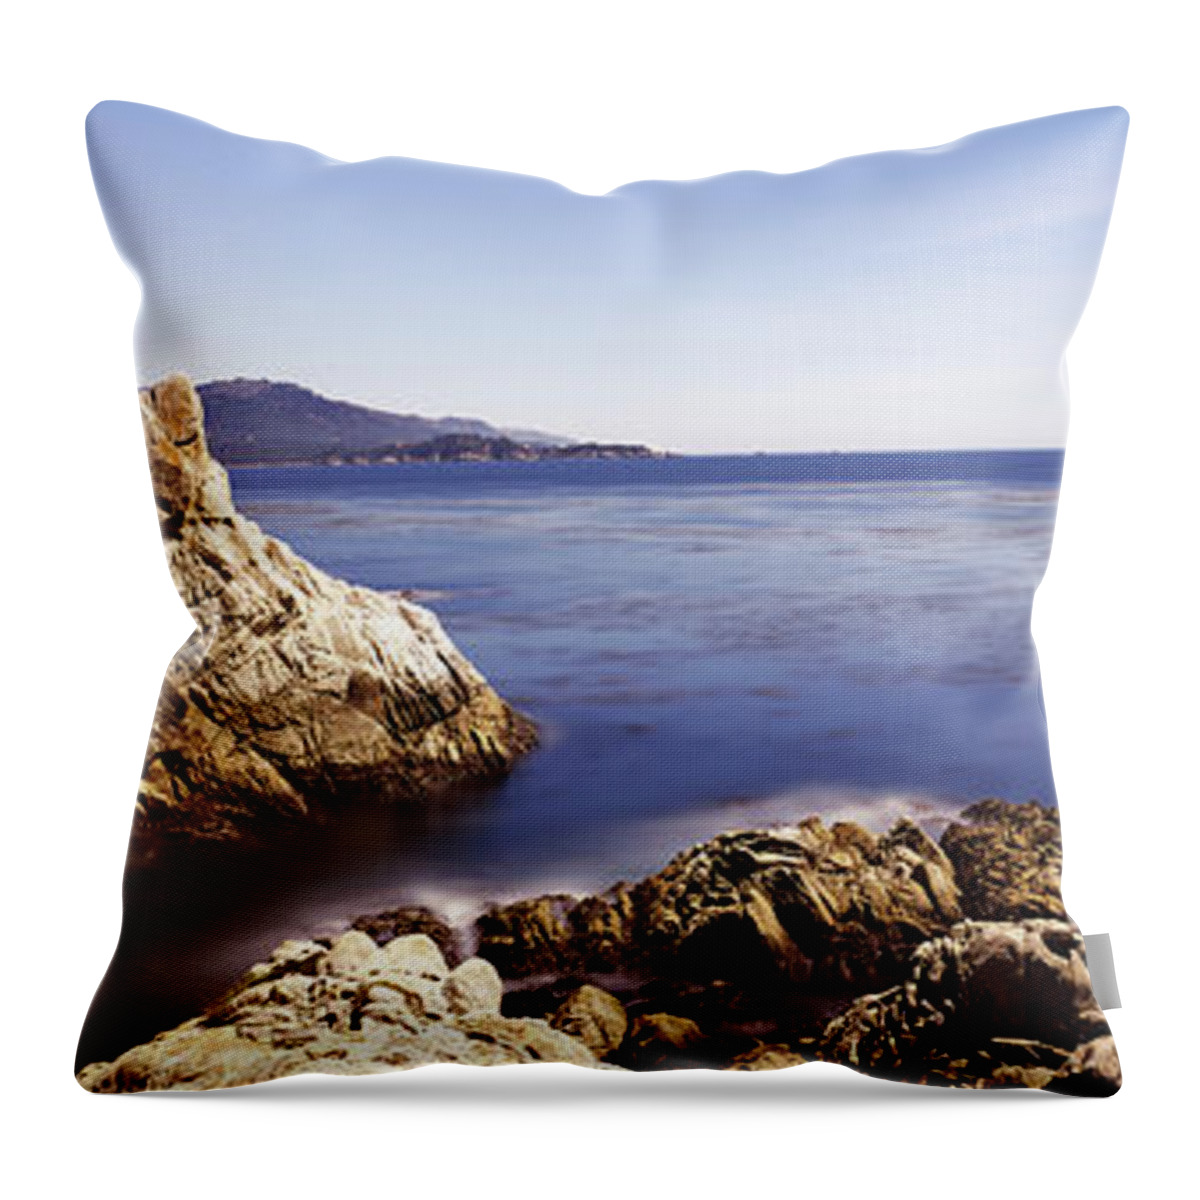 Photography Throw Pillow featuring the photograph Cypress Tree At The Coast, The Lone #1 by Panoramic Images